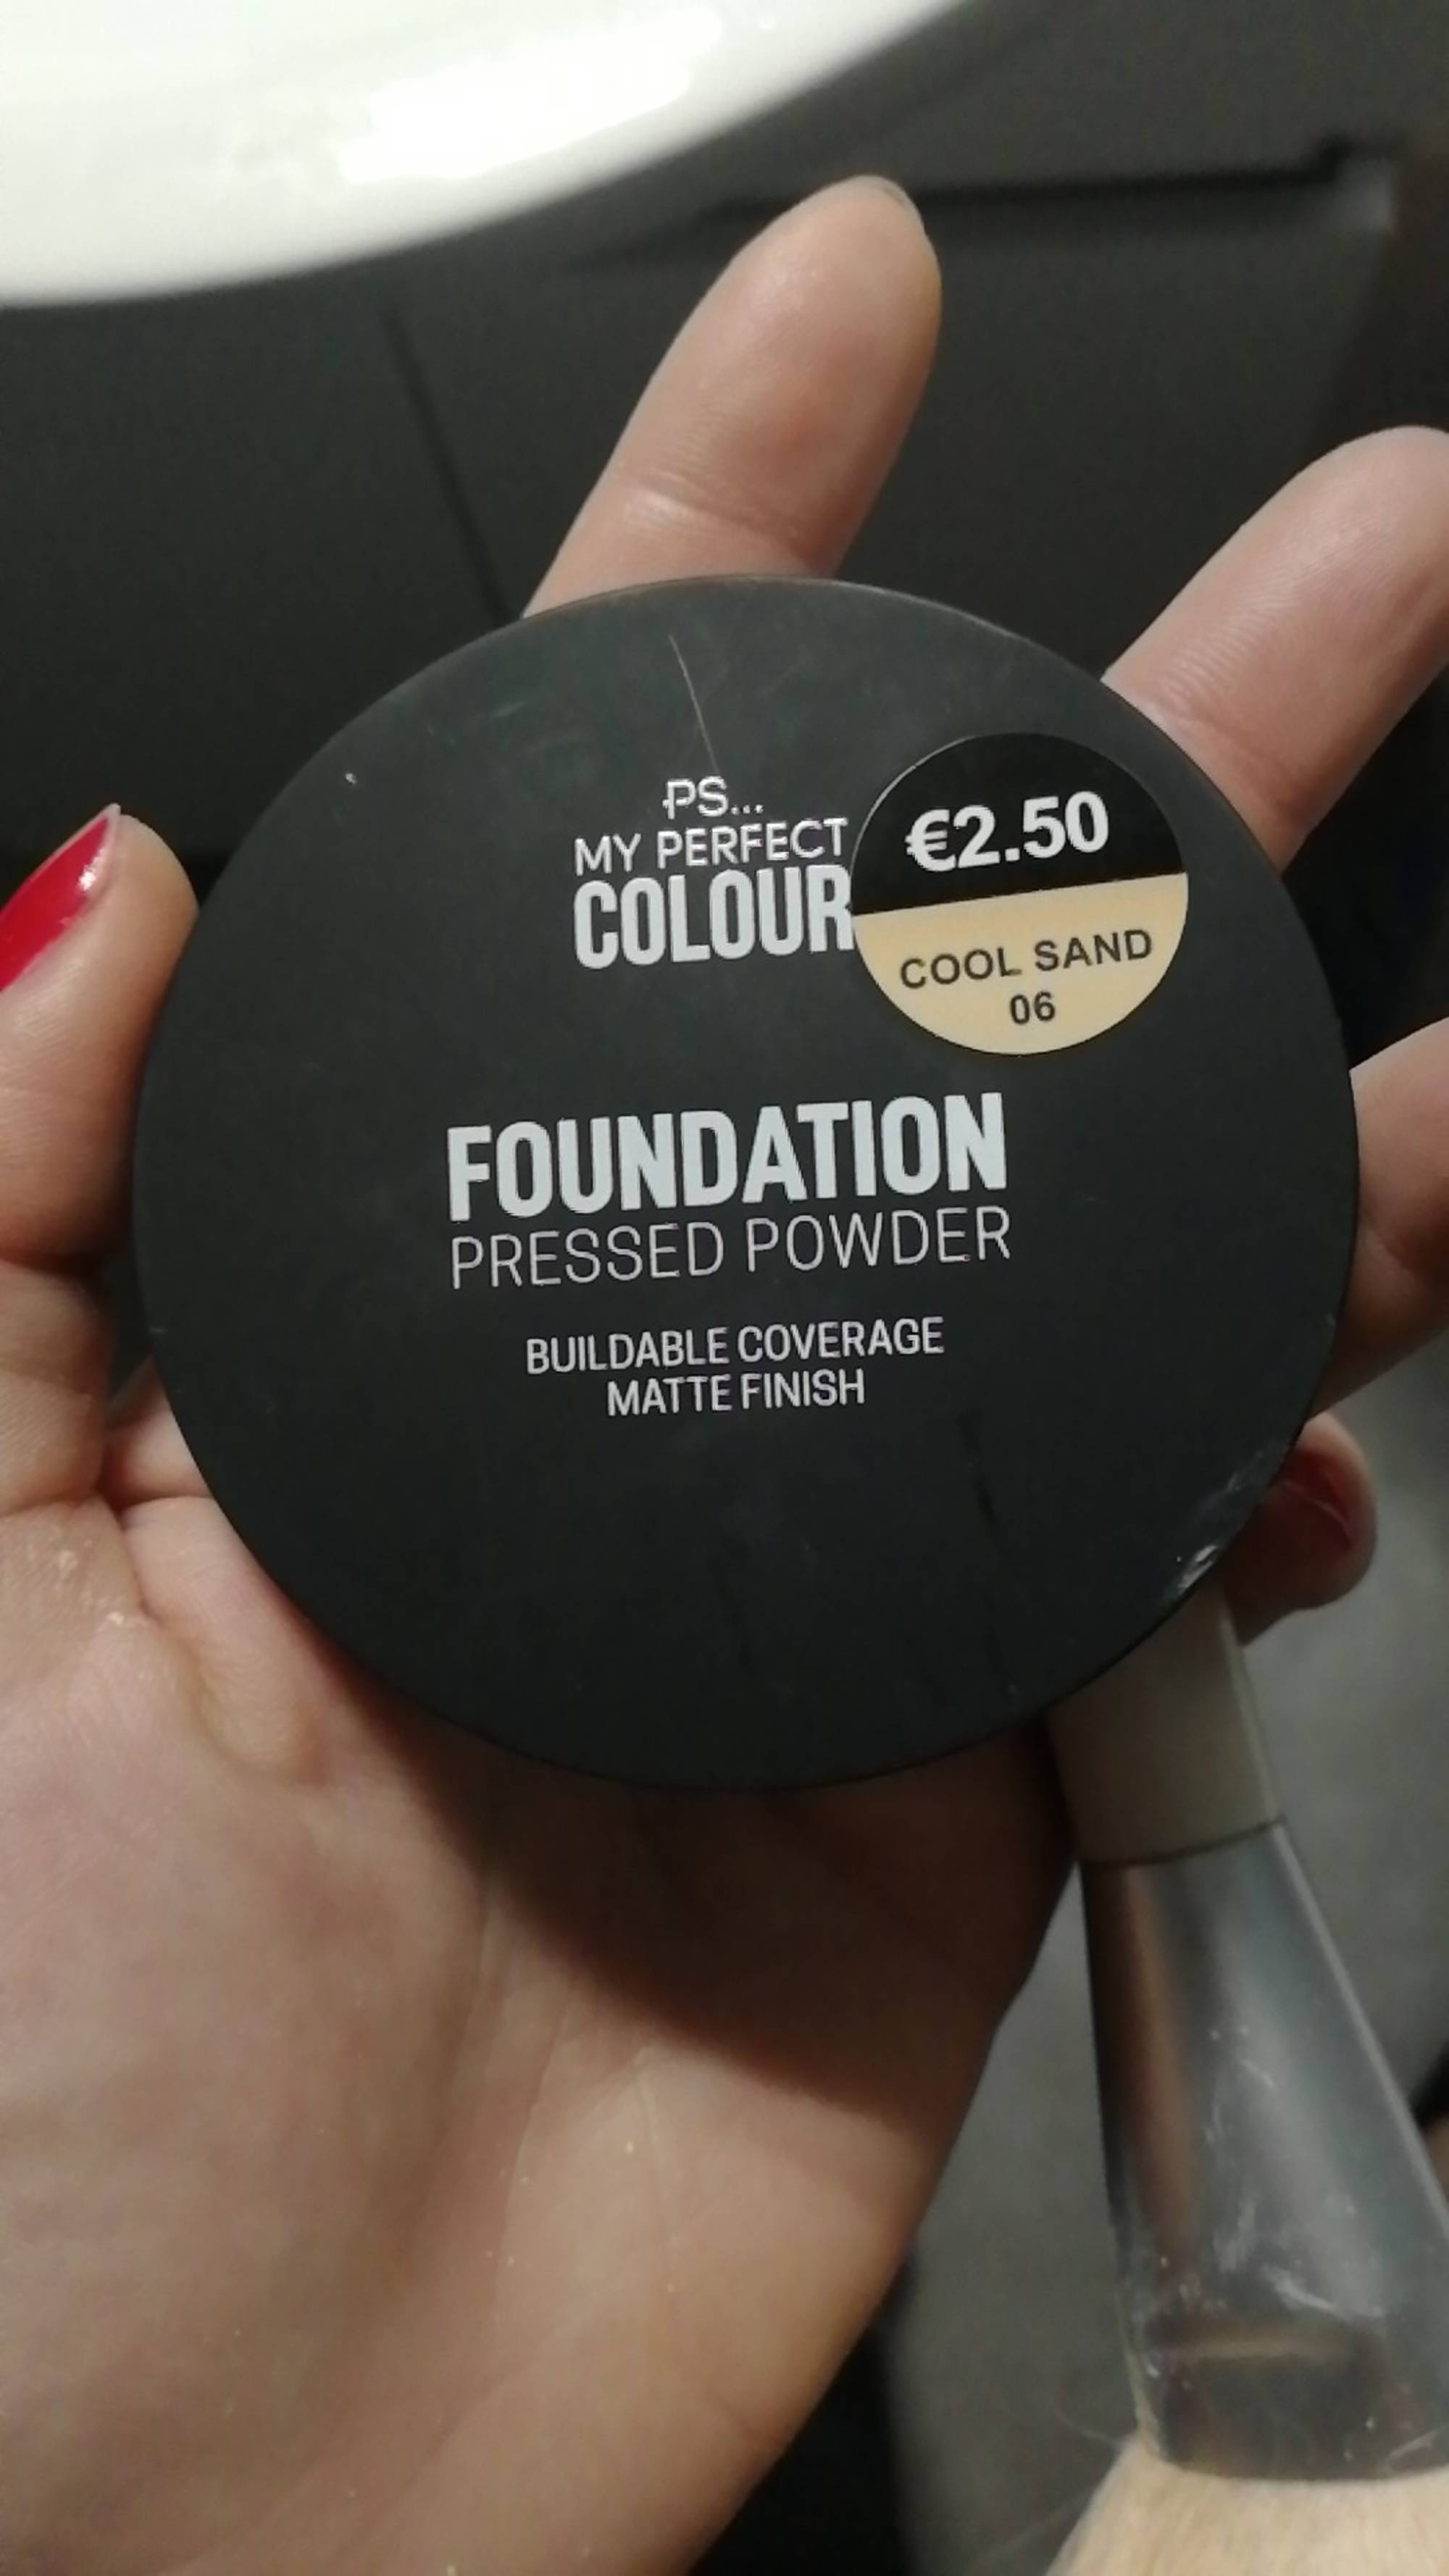 PRIMARK - PS... my perfect colour - Foundation pressed powder - Cool sand 06